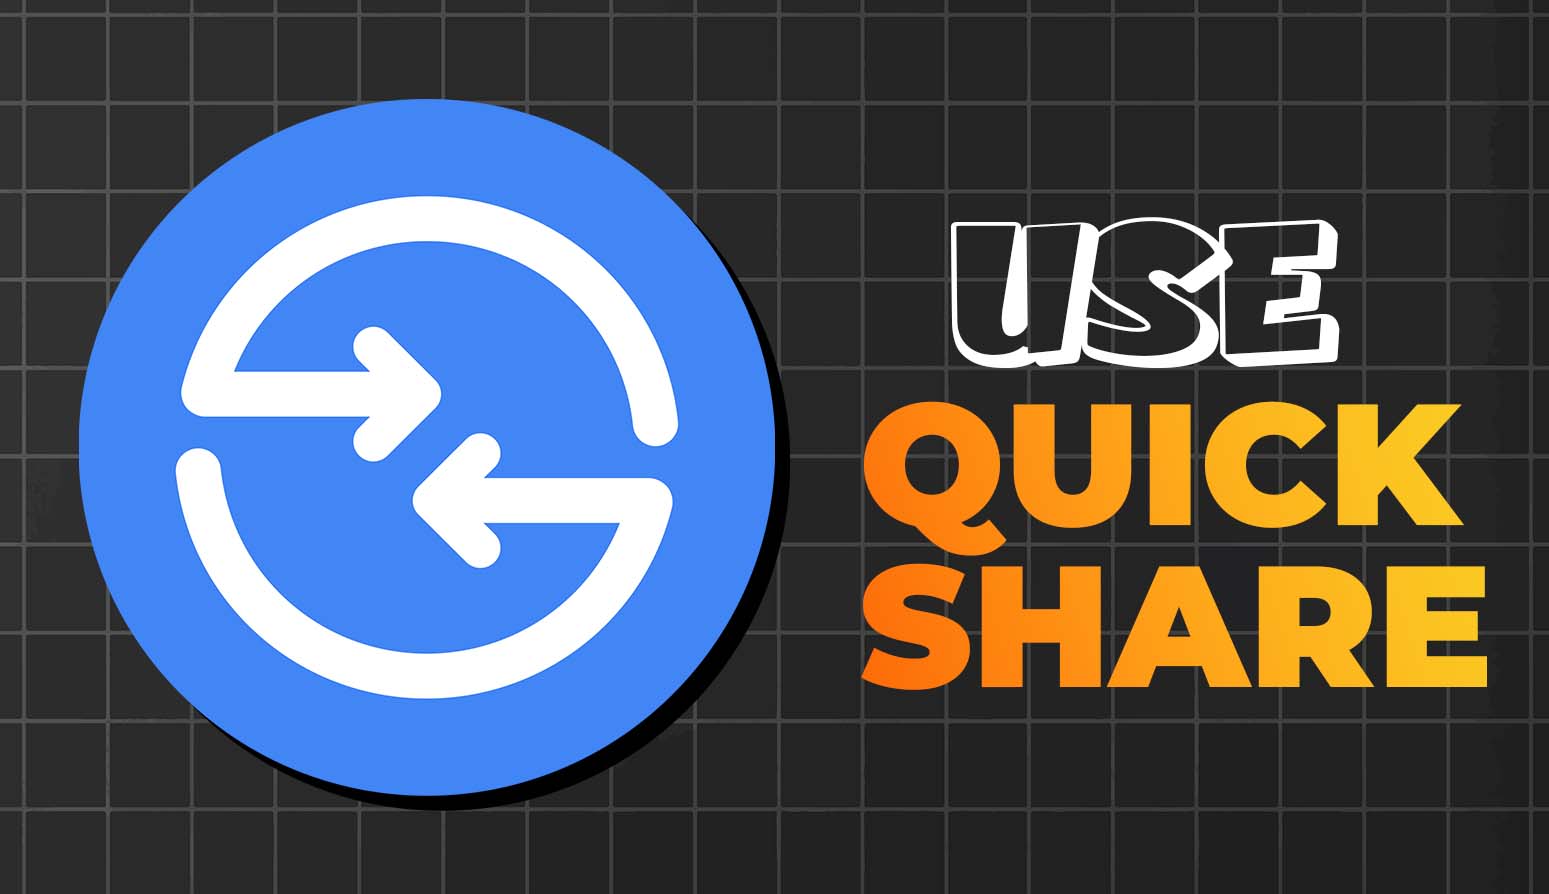 How to Use Quick Share? Step-by-Step Guide